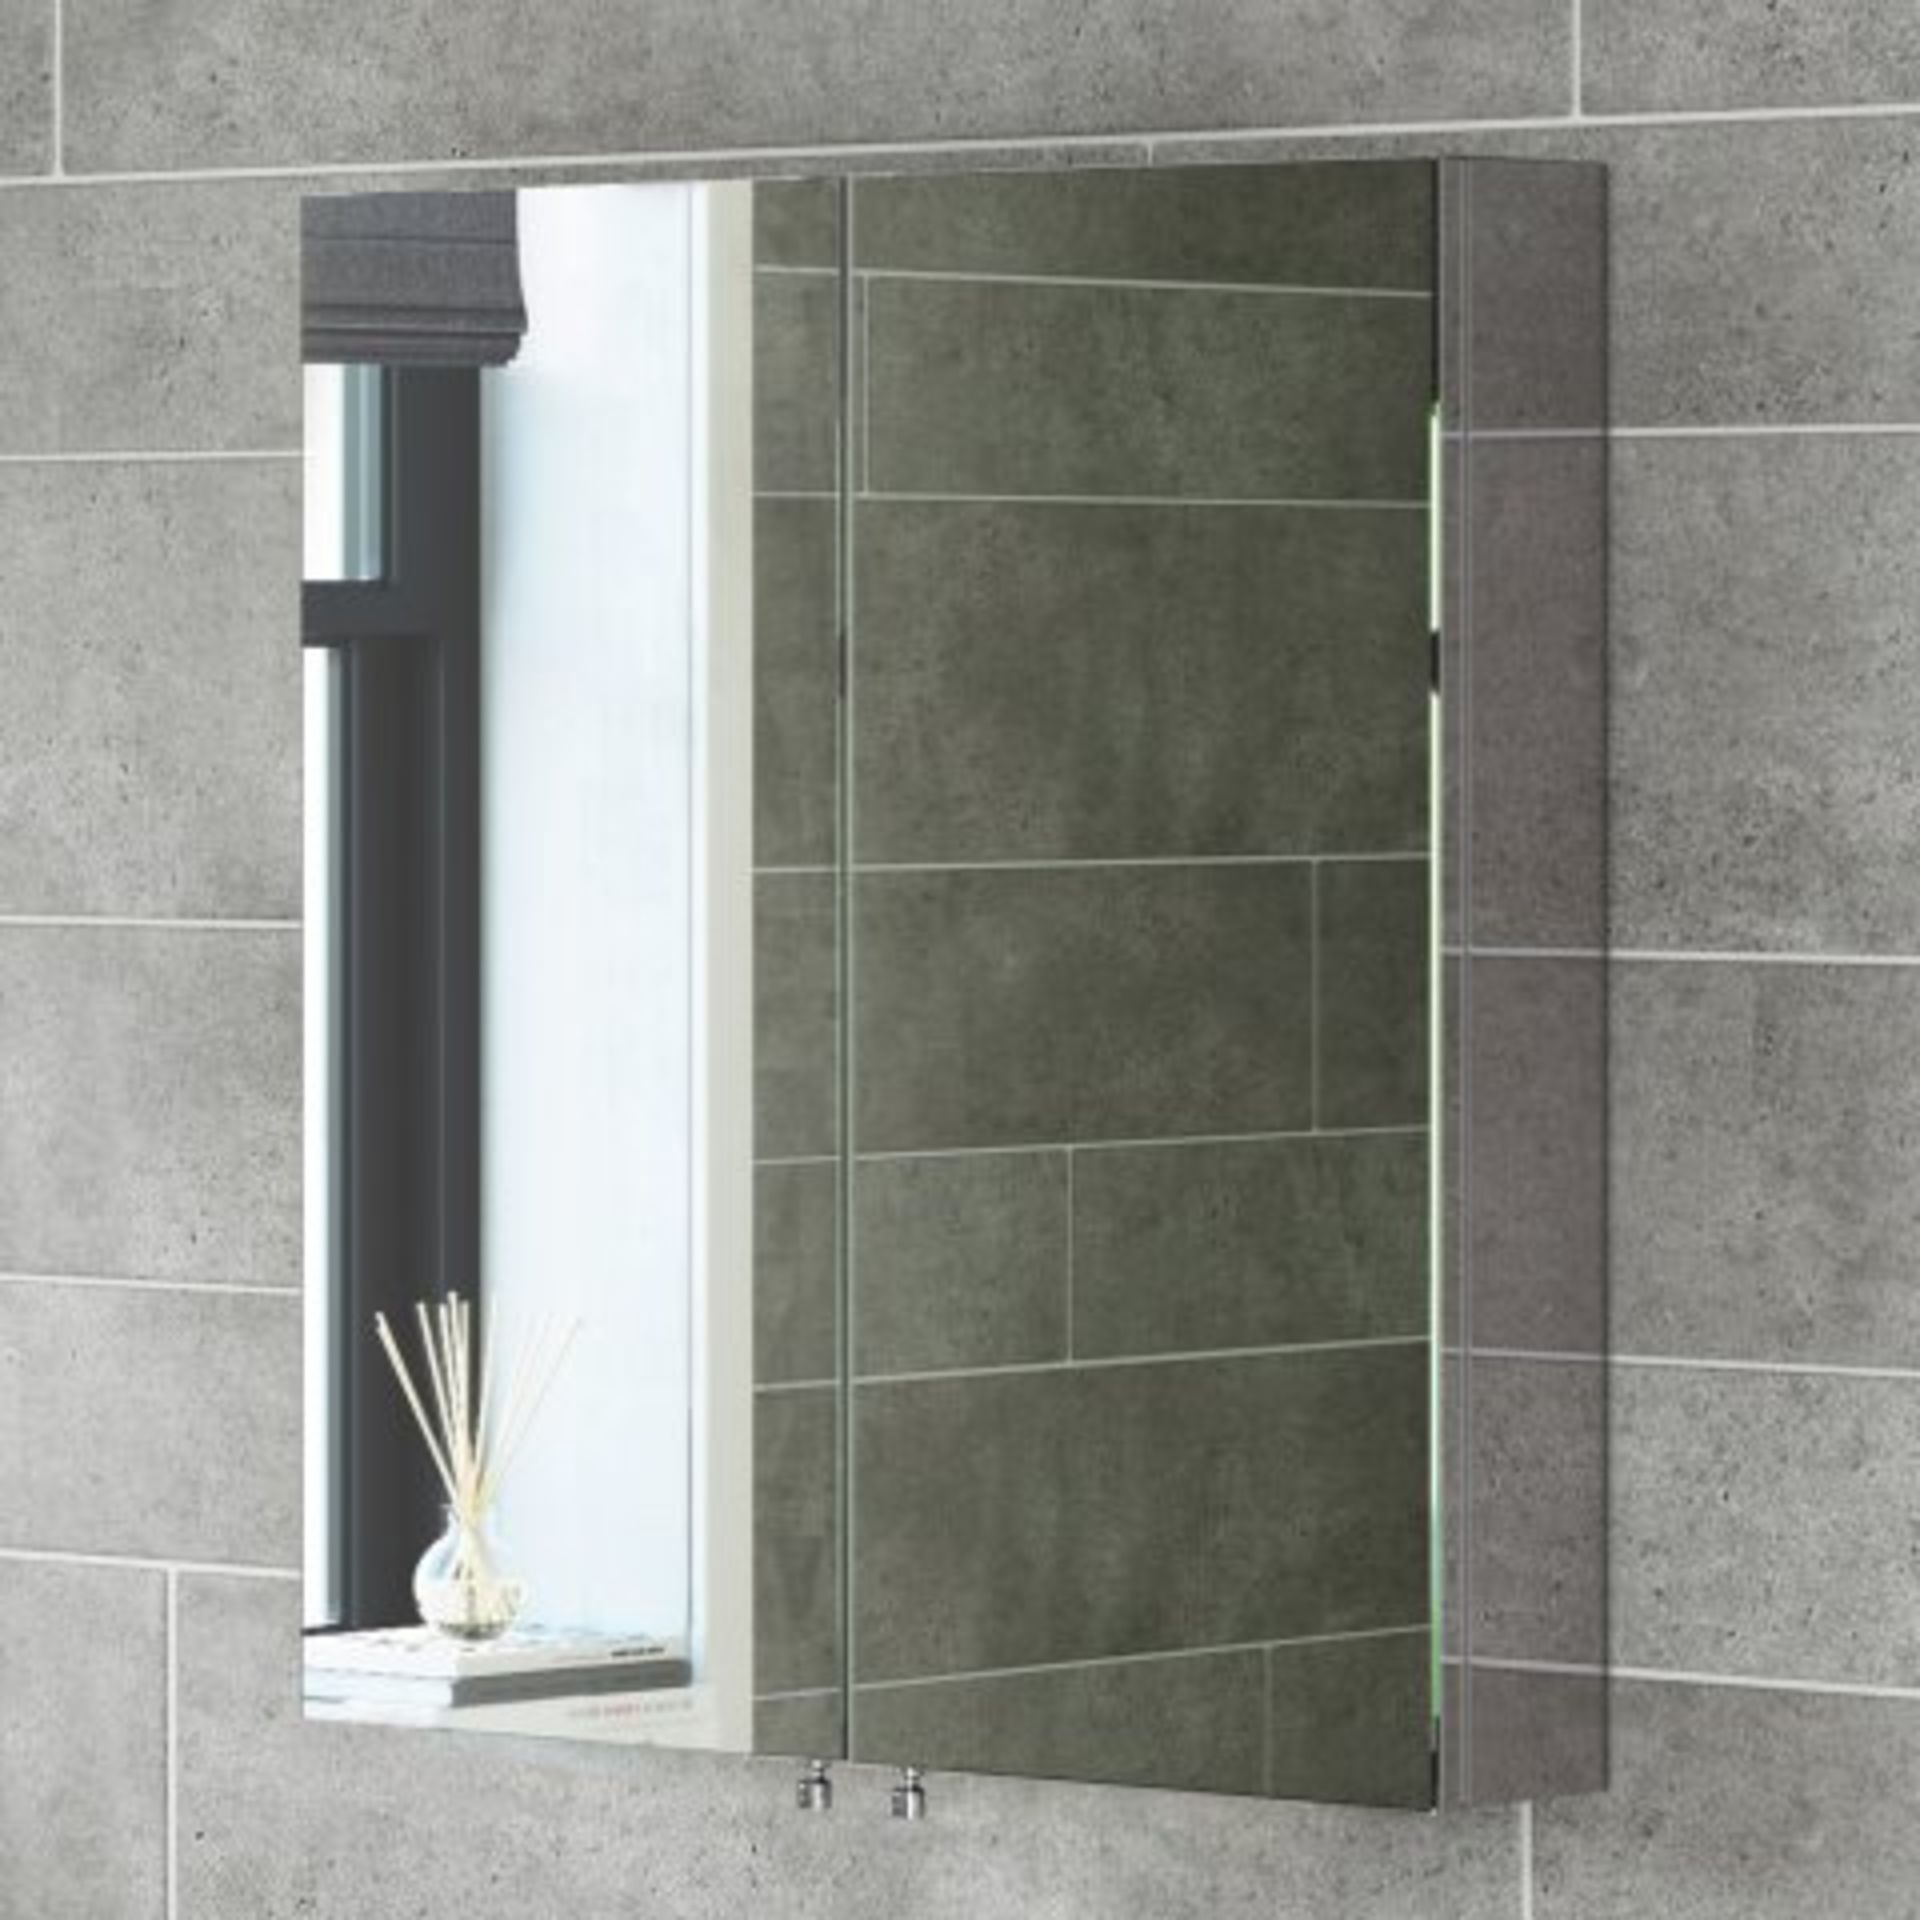 (I152) 670x600mm Liberty Stainless Steel Double Door Mirror Cabinet. RRP £262.99. Perfect Reflection